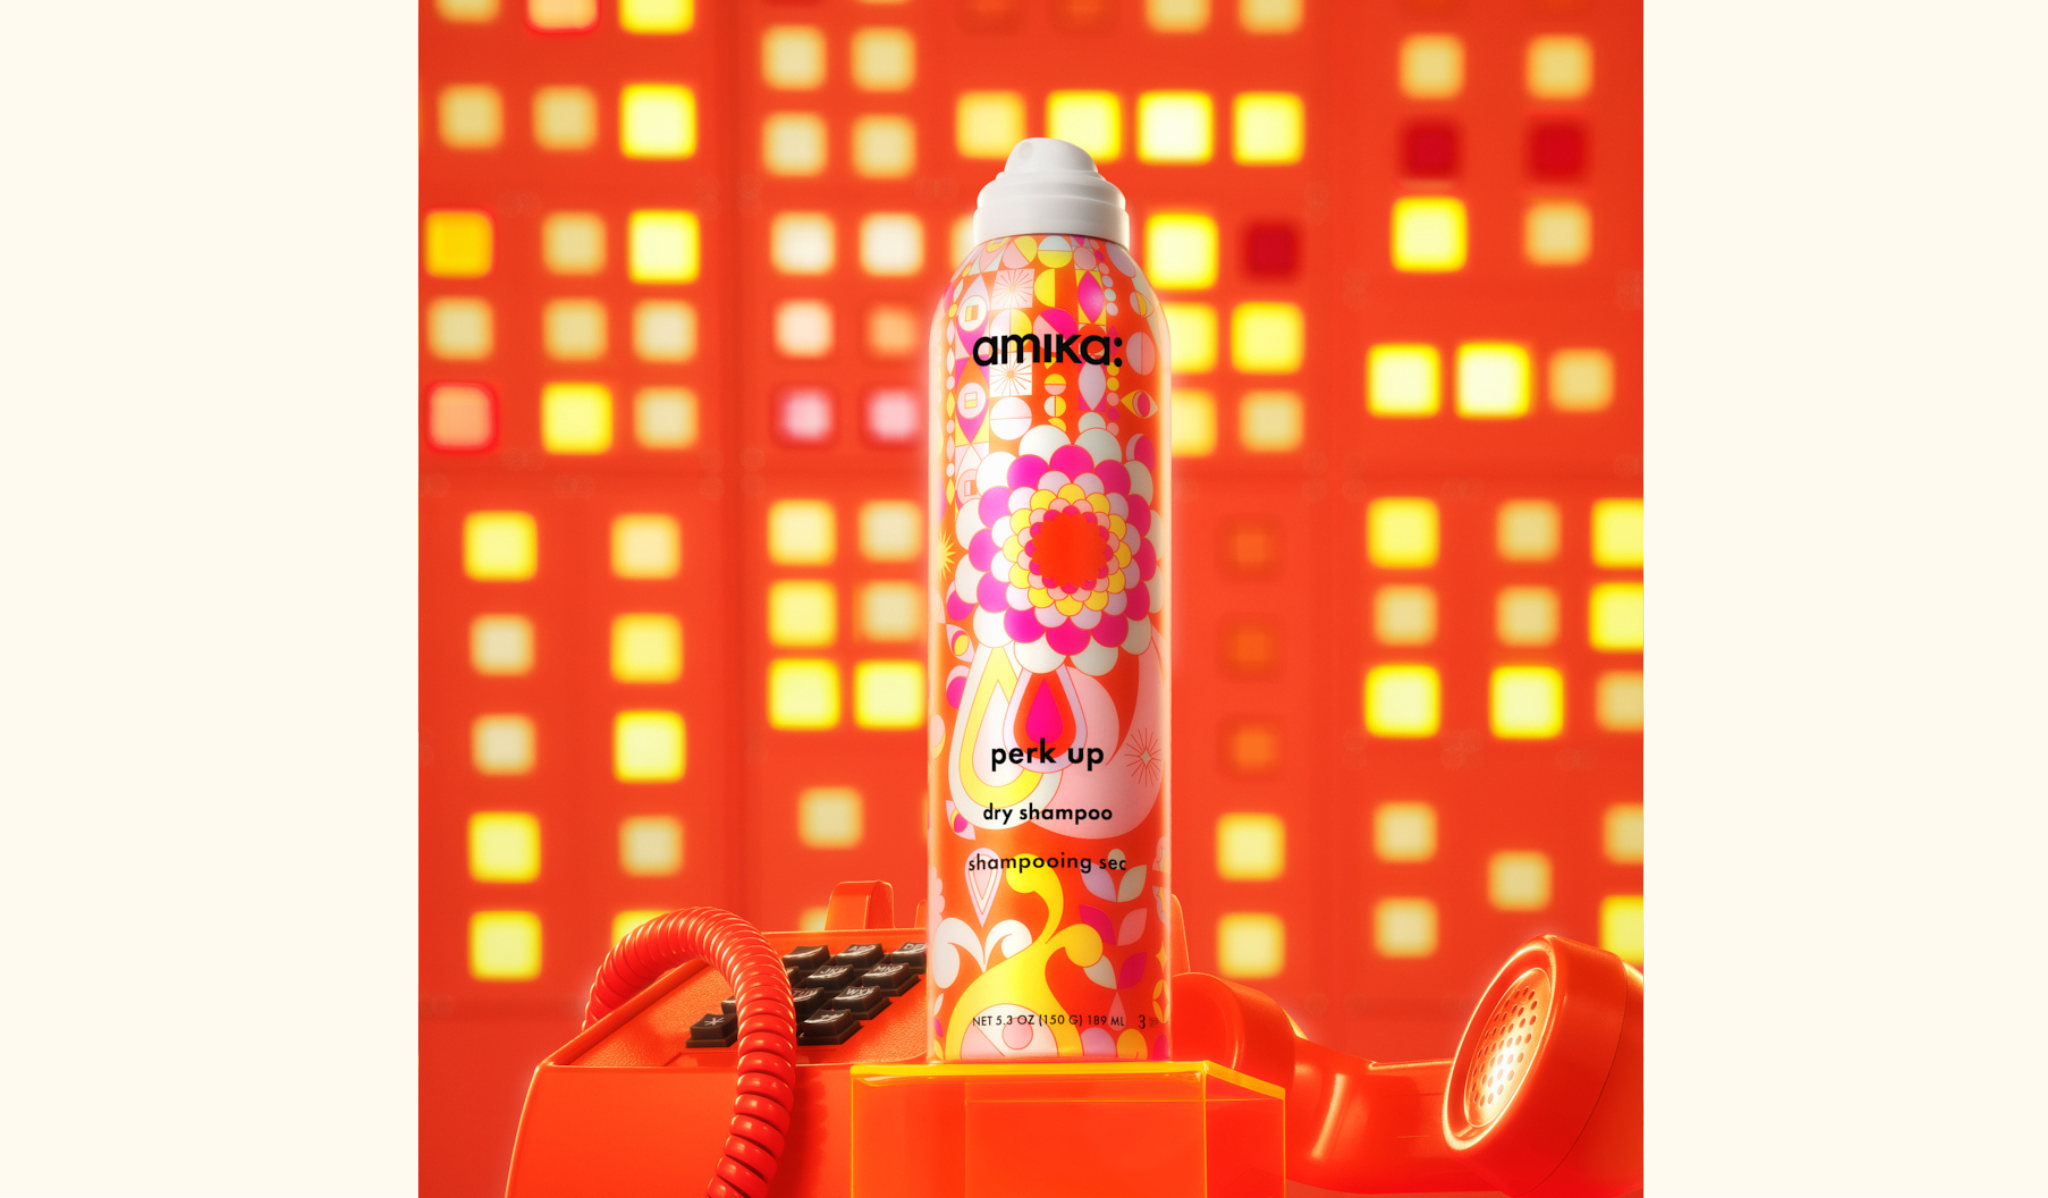 amika perk up talc-free dry shampoo spray bottle 5.3oz - pictured with an orange telephone against a geometric background